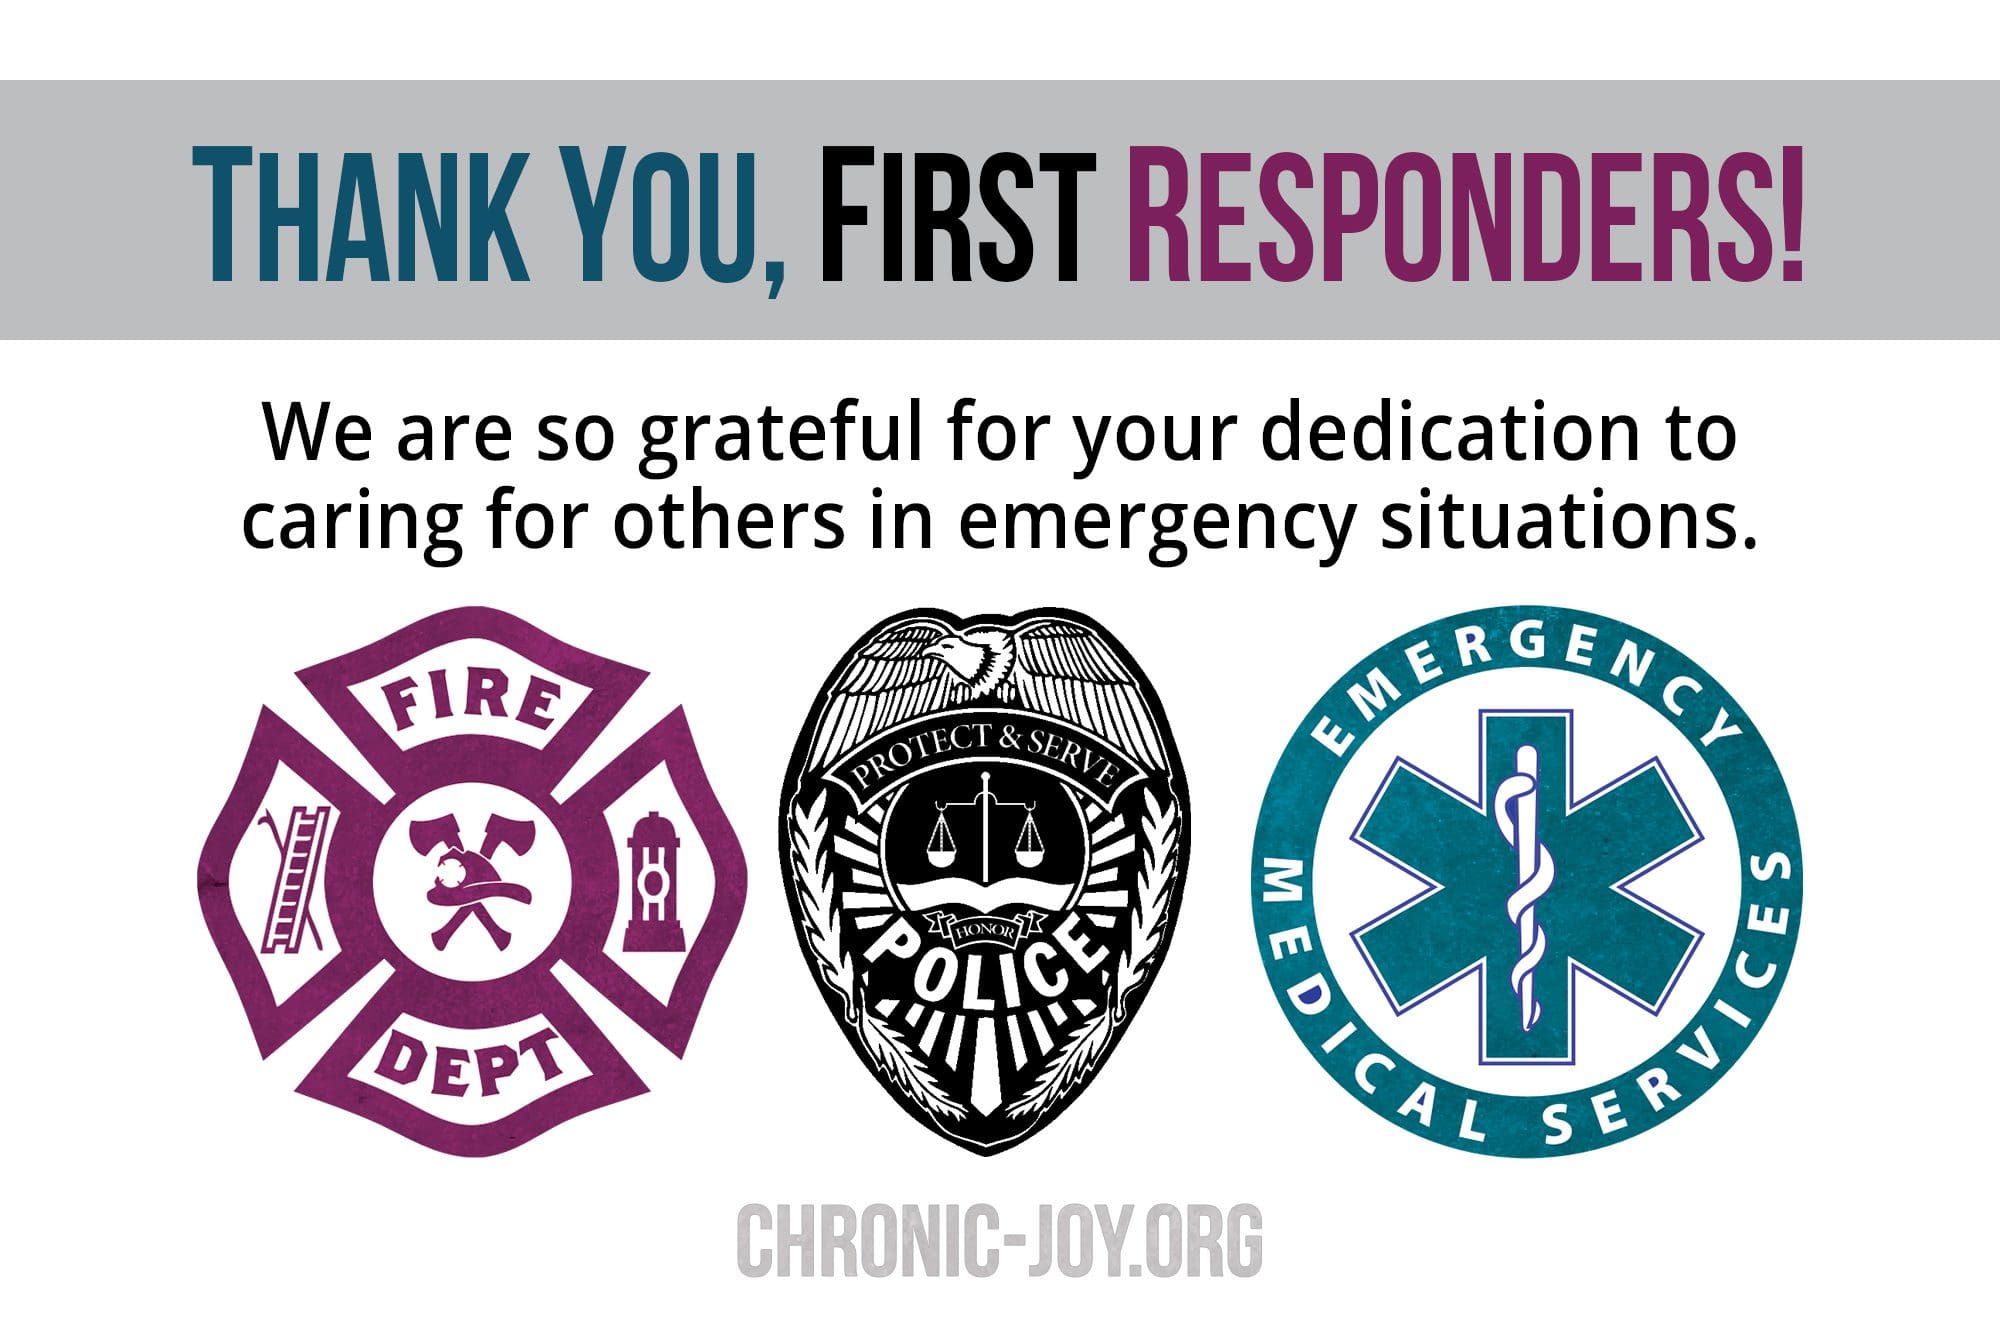 Thank You, First Responders! - "We are so grateful for your dedication to caring for others in emergency situations.